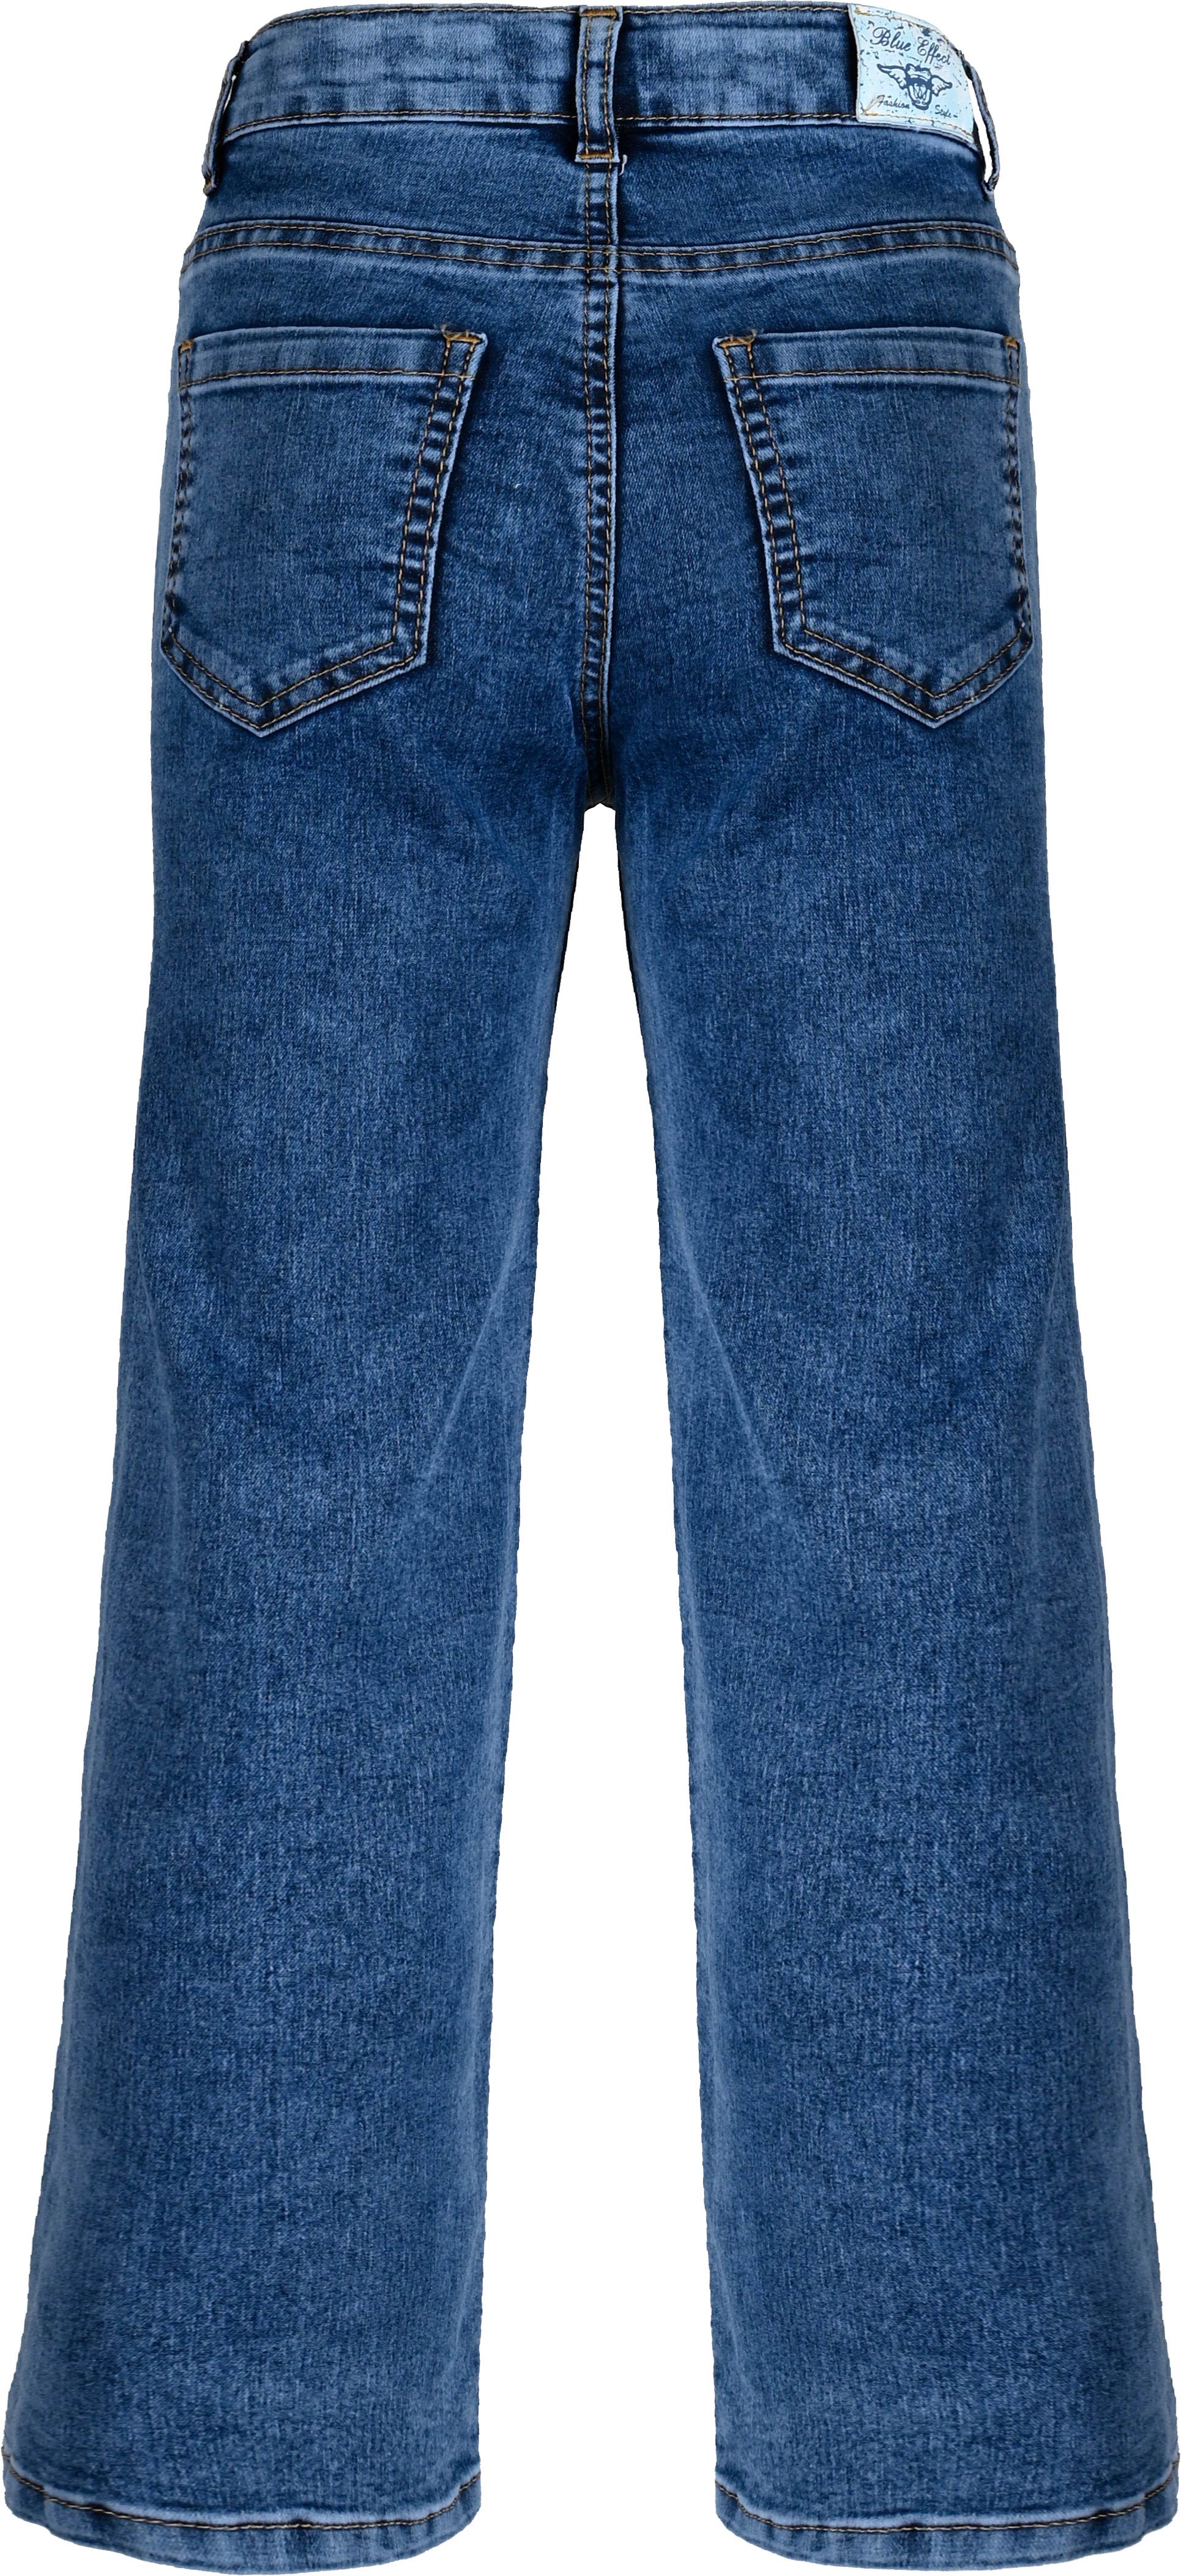 1304-NOS Girls Wide Leg Jeans available in Slim,Normal